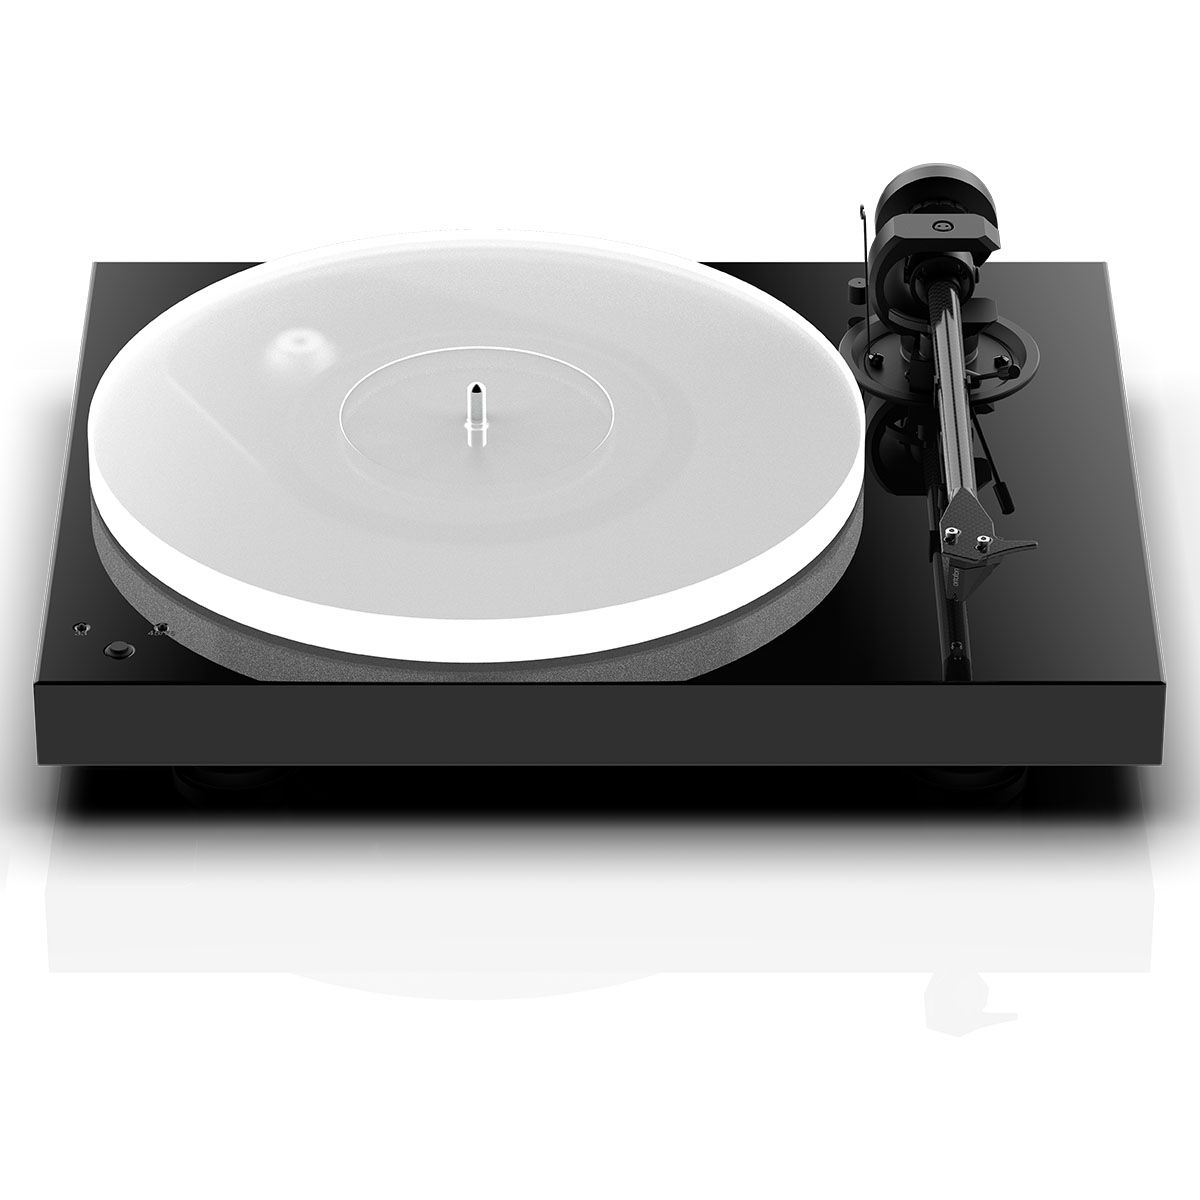 Pro-Ject X1B True Balanced Turntable - front view of gloss black